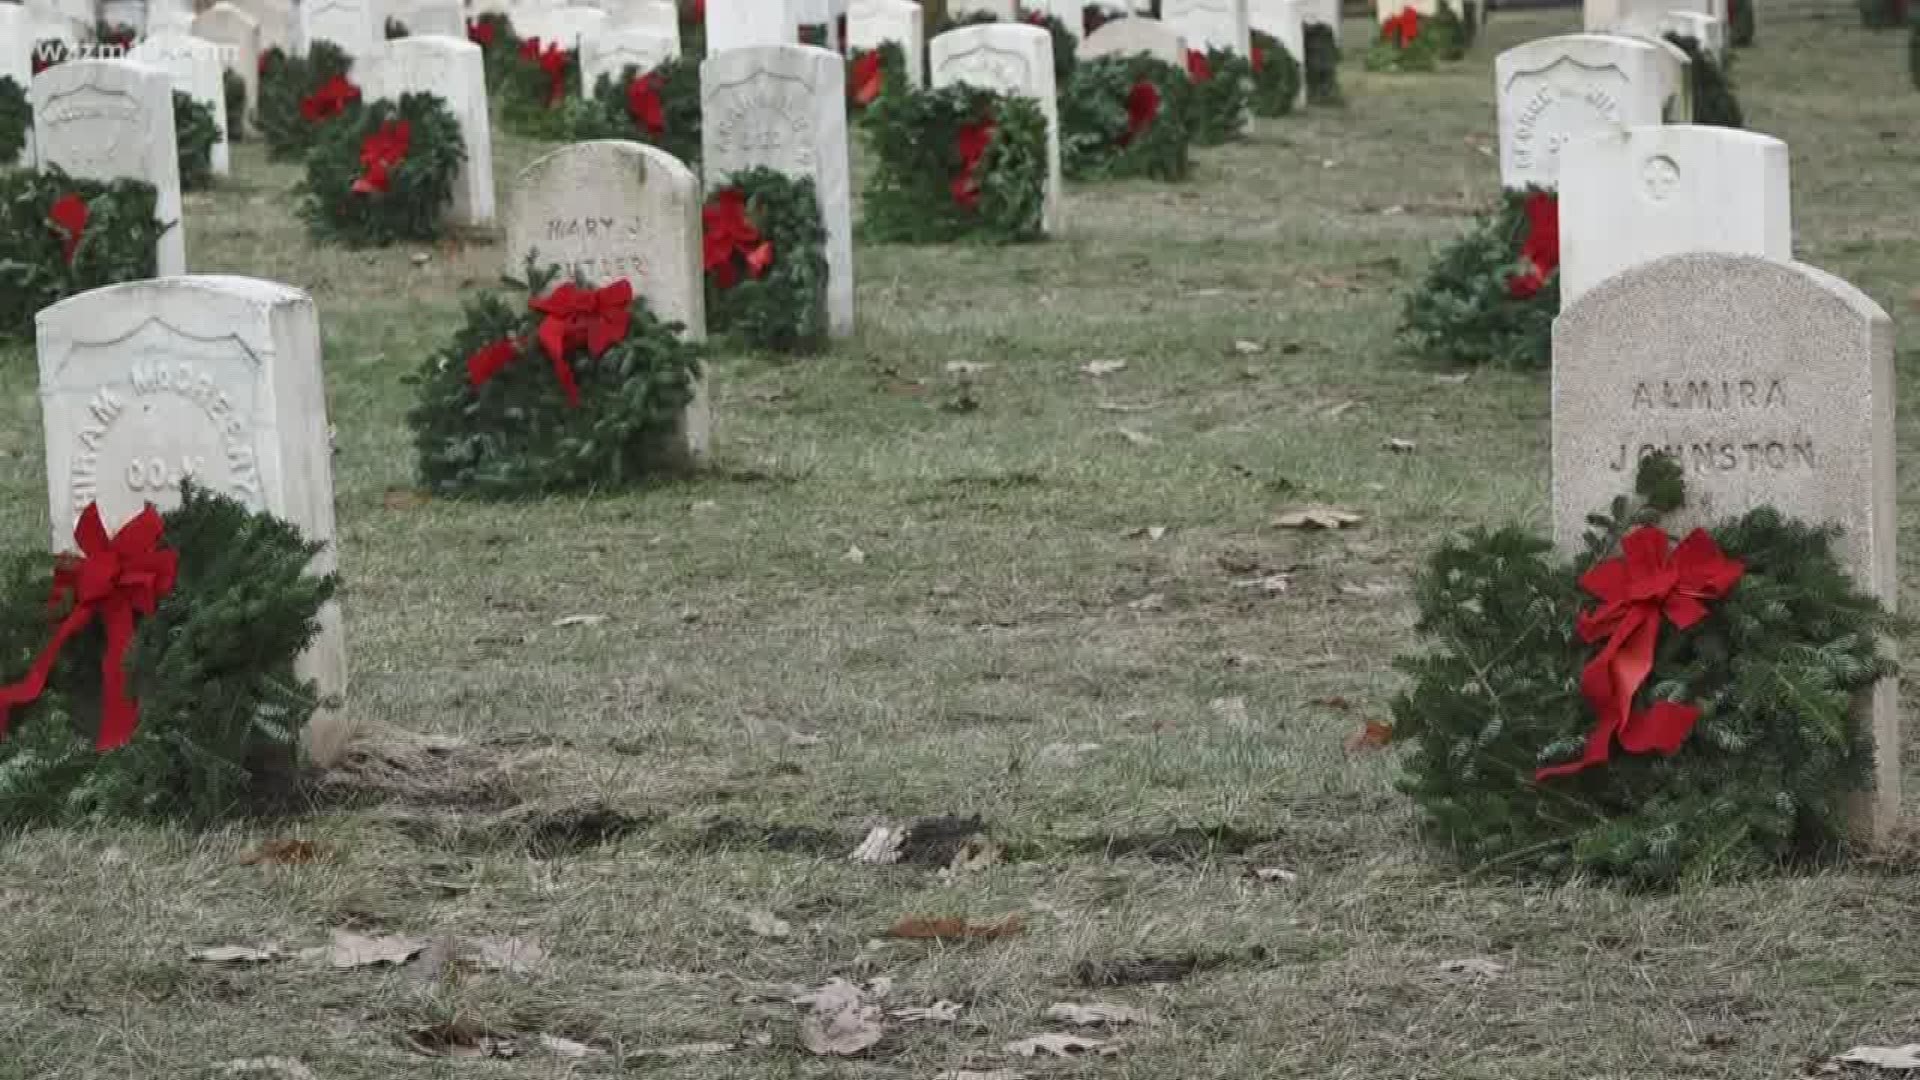 Fallen veterans honored with wreaths